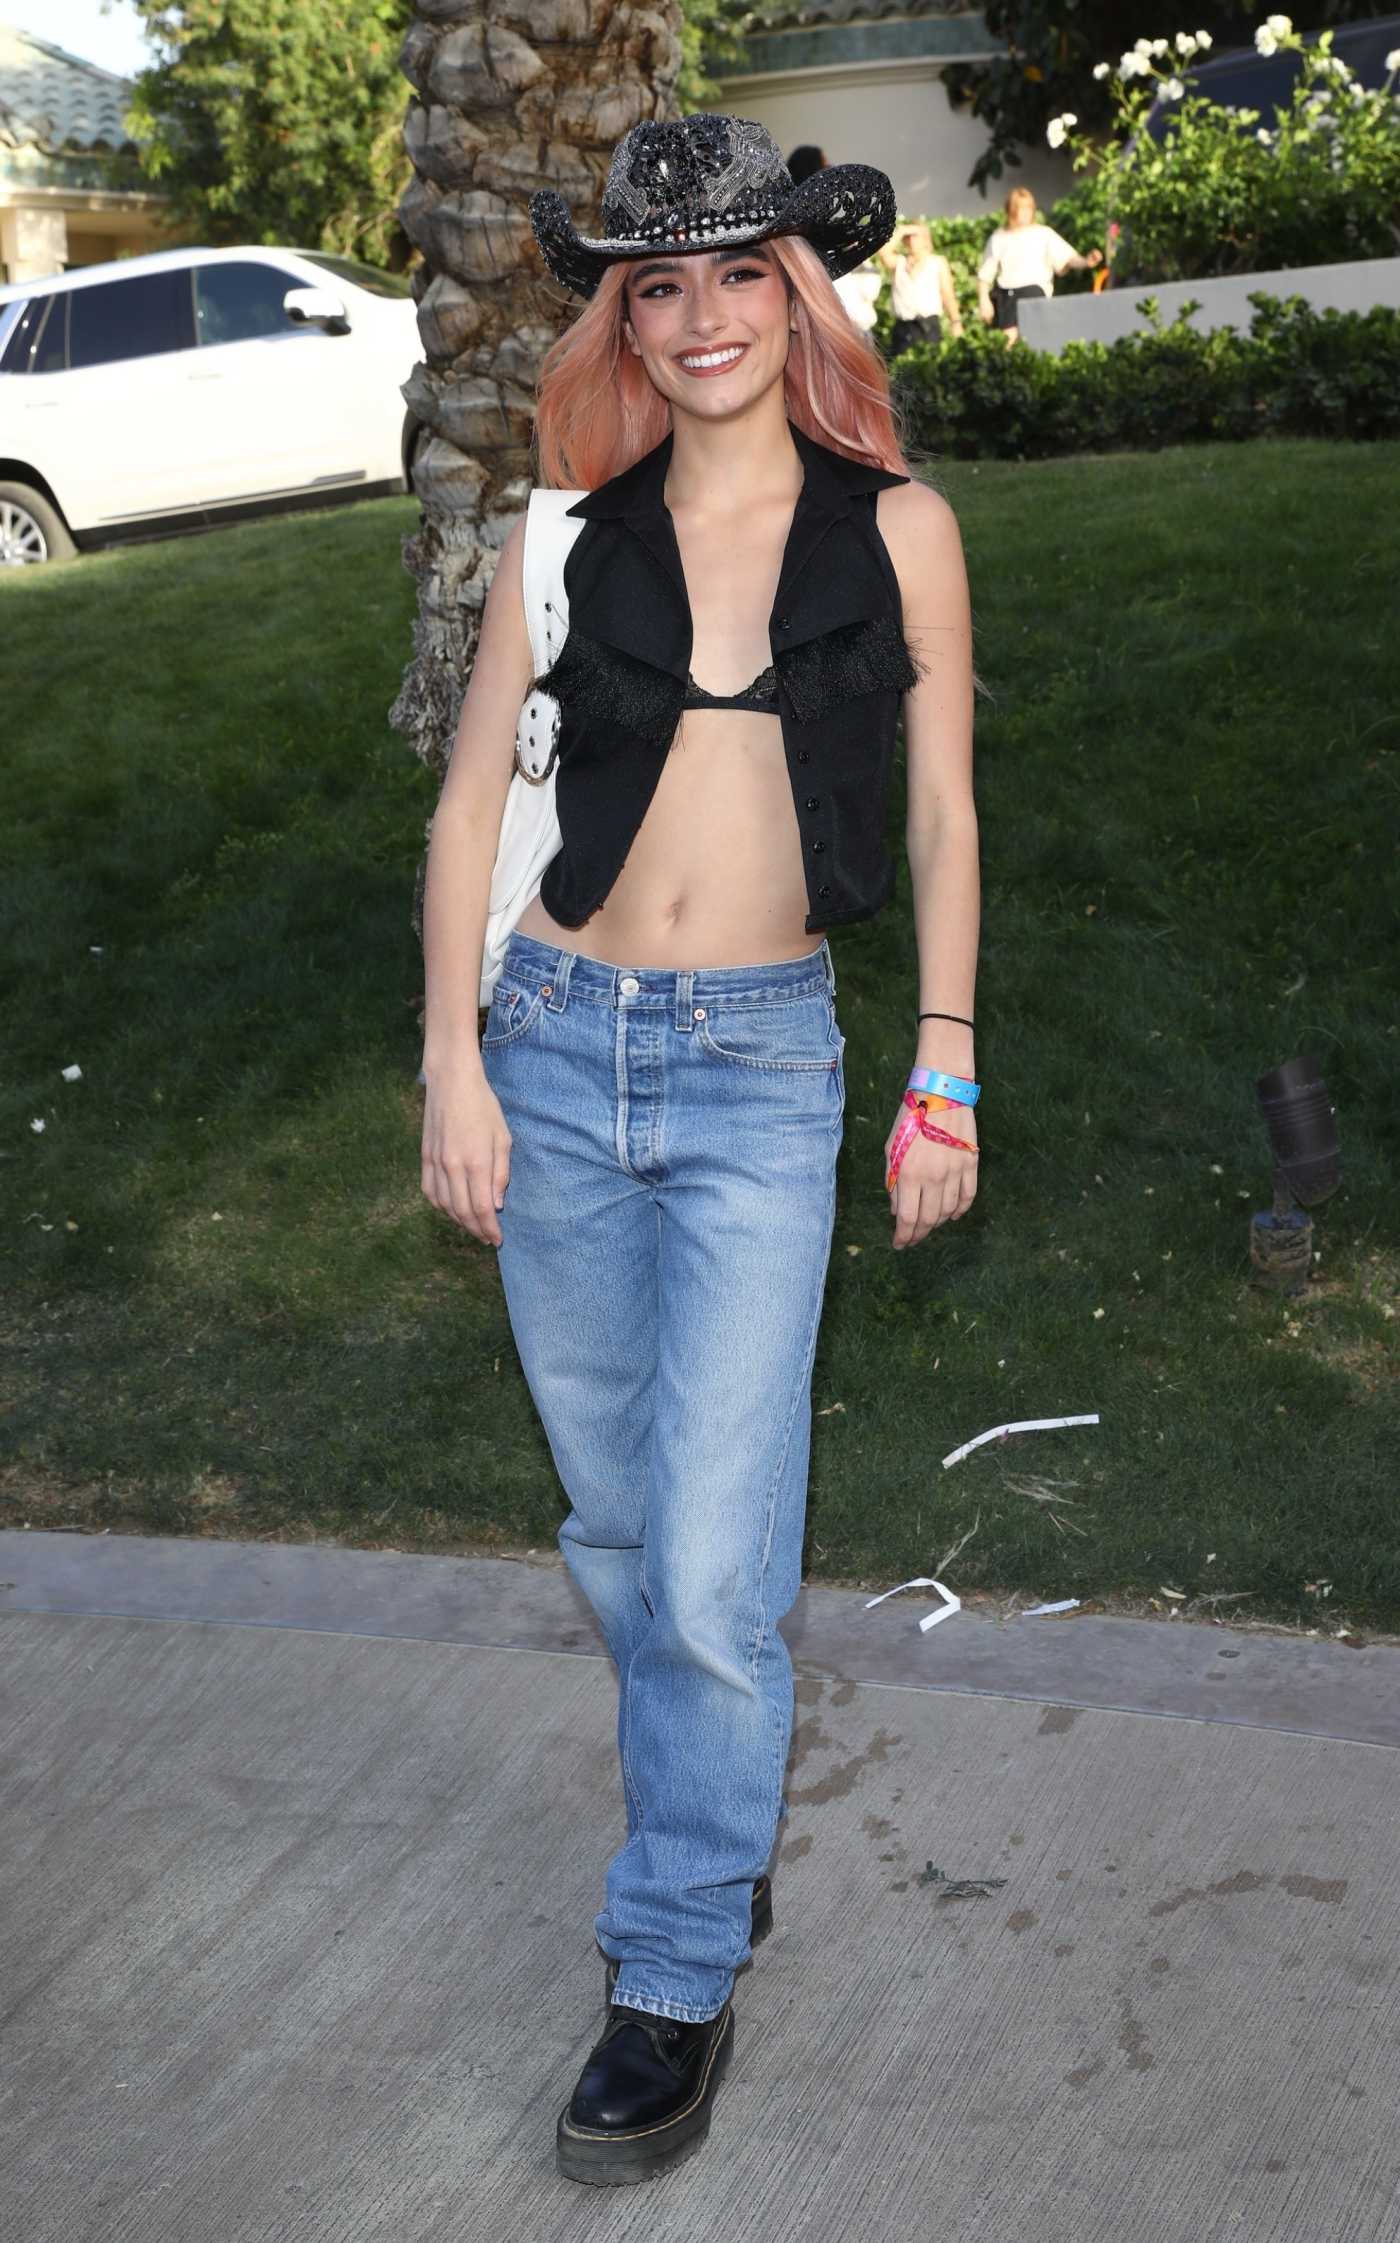 Dixie D'amelio in a Grey Hat Attends 2022 Coachella Valley Music And Arts Festival in Indio 04/16/2022